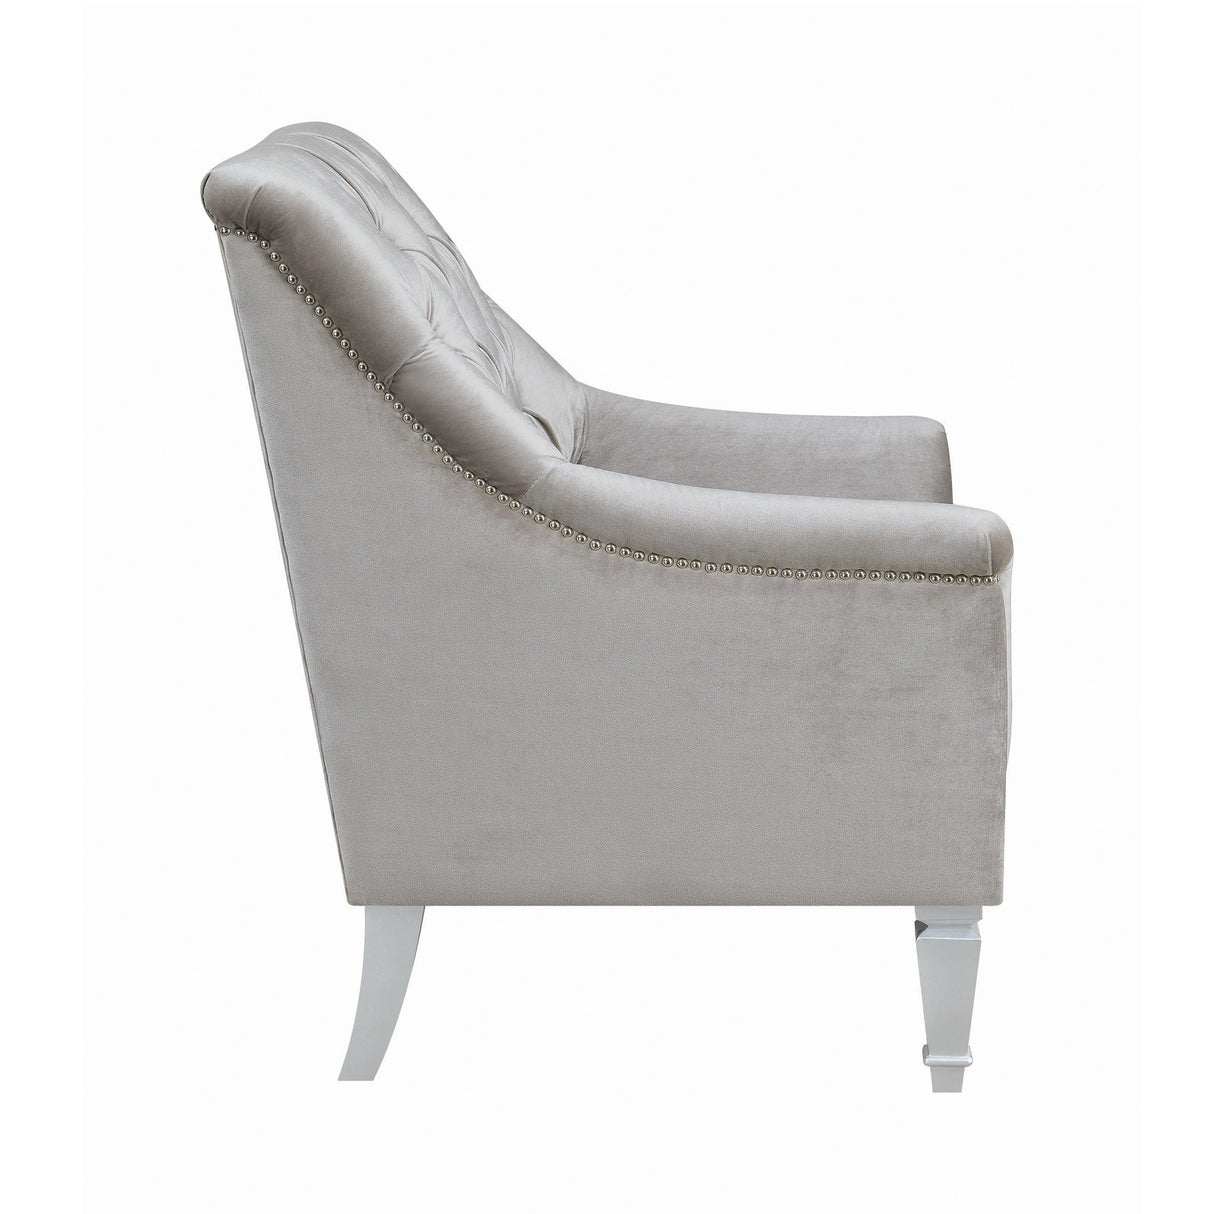 Avonlea Sloped Arm Tufted Chair Grey by Coaster Furniture Coaster Furniture